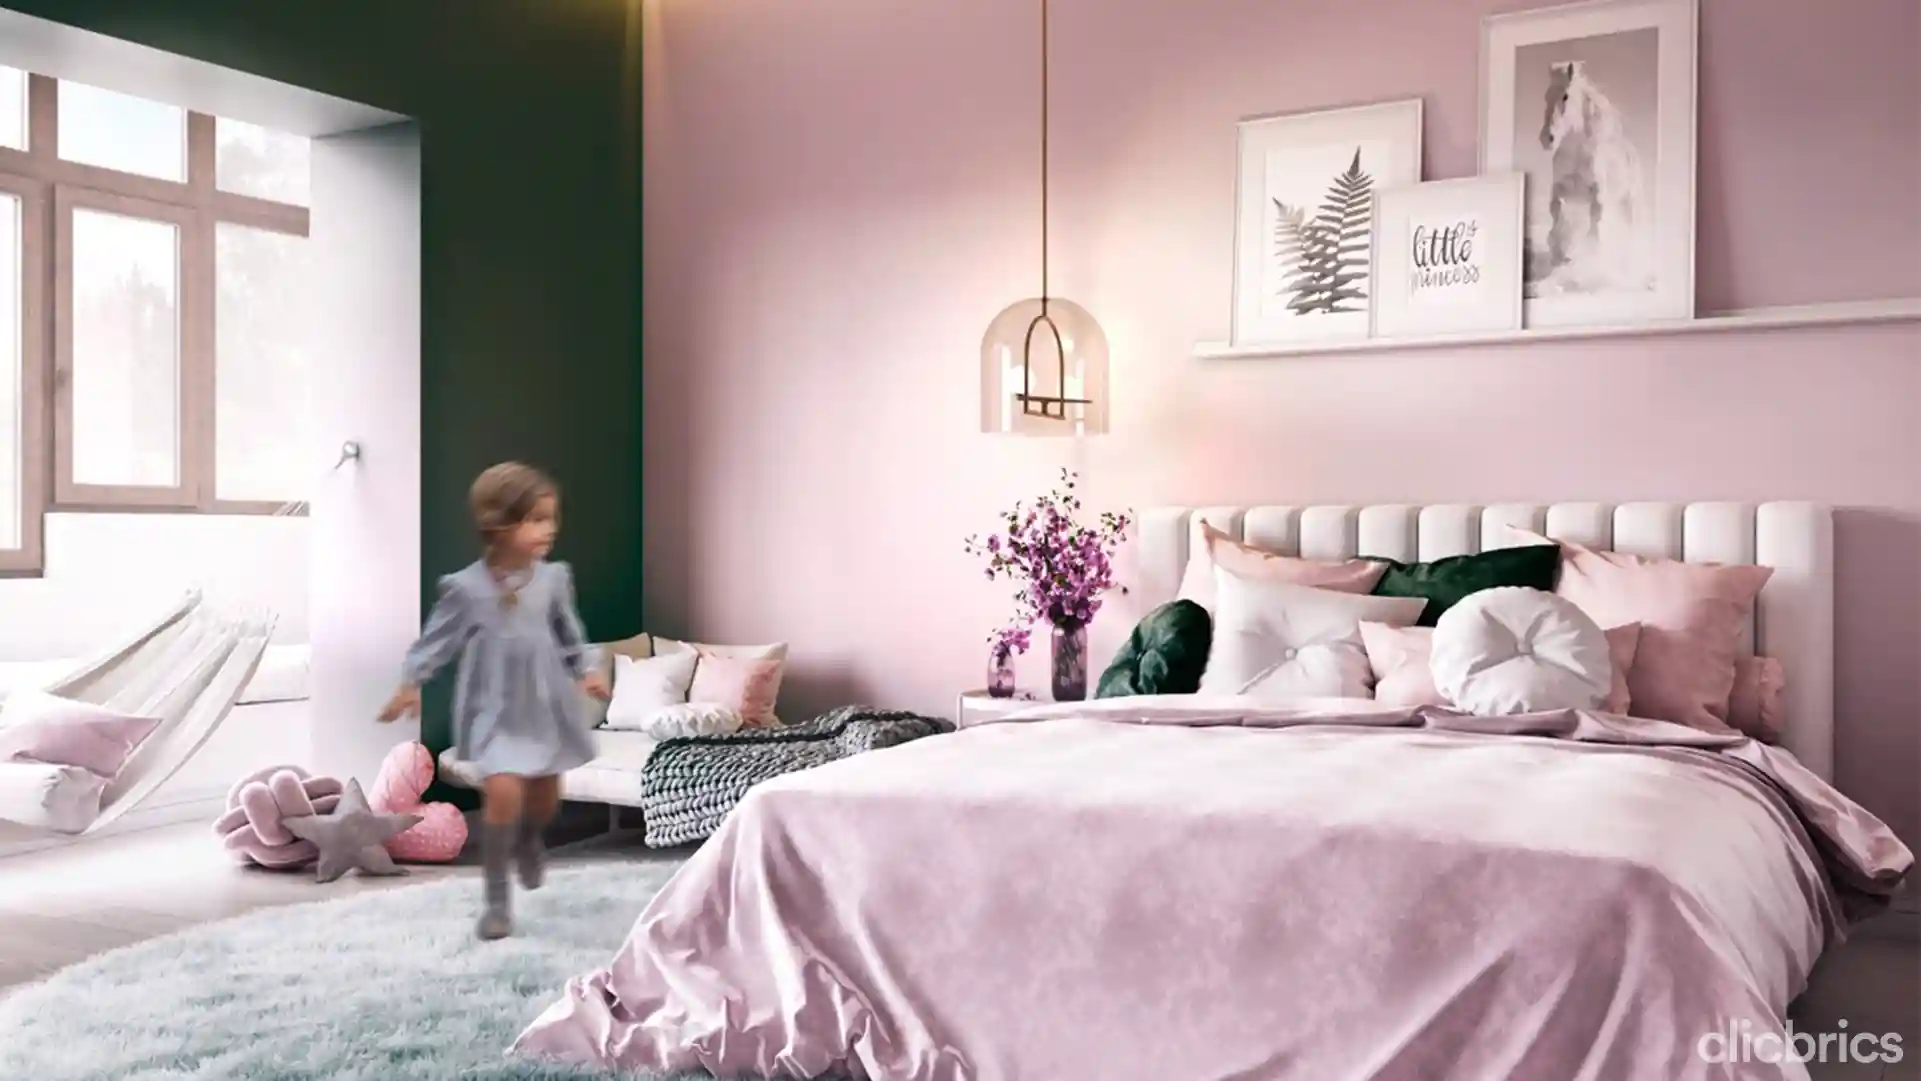 15 Pink Two Colour Combination for Bedroom Walls For A Blush Look